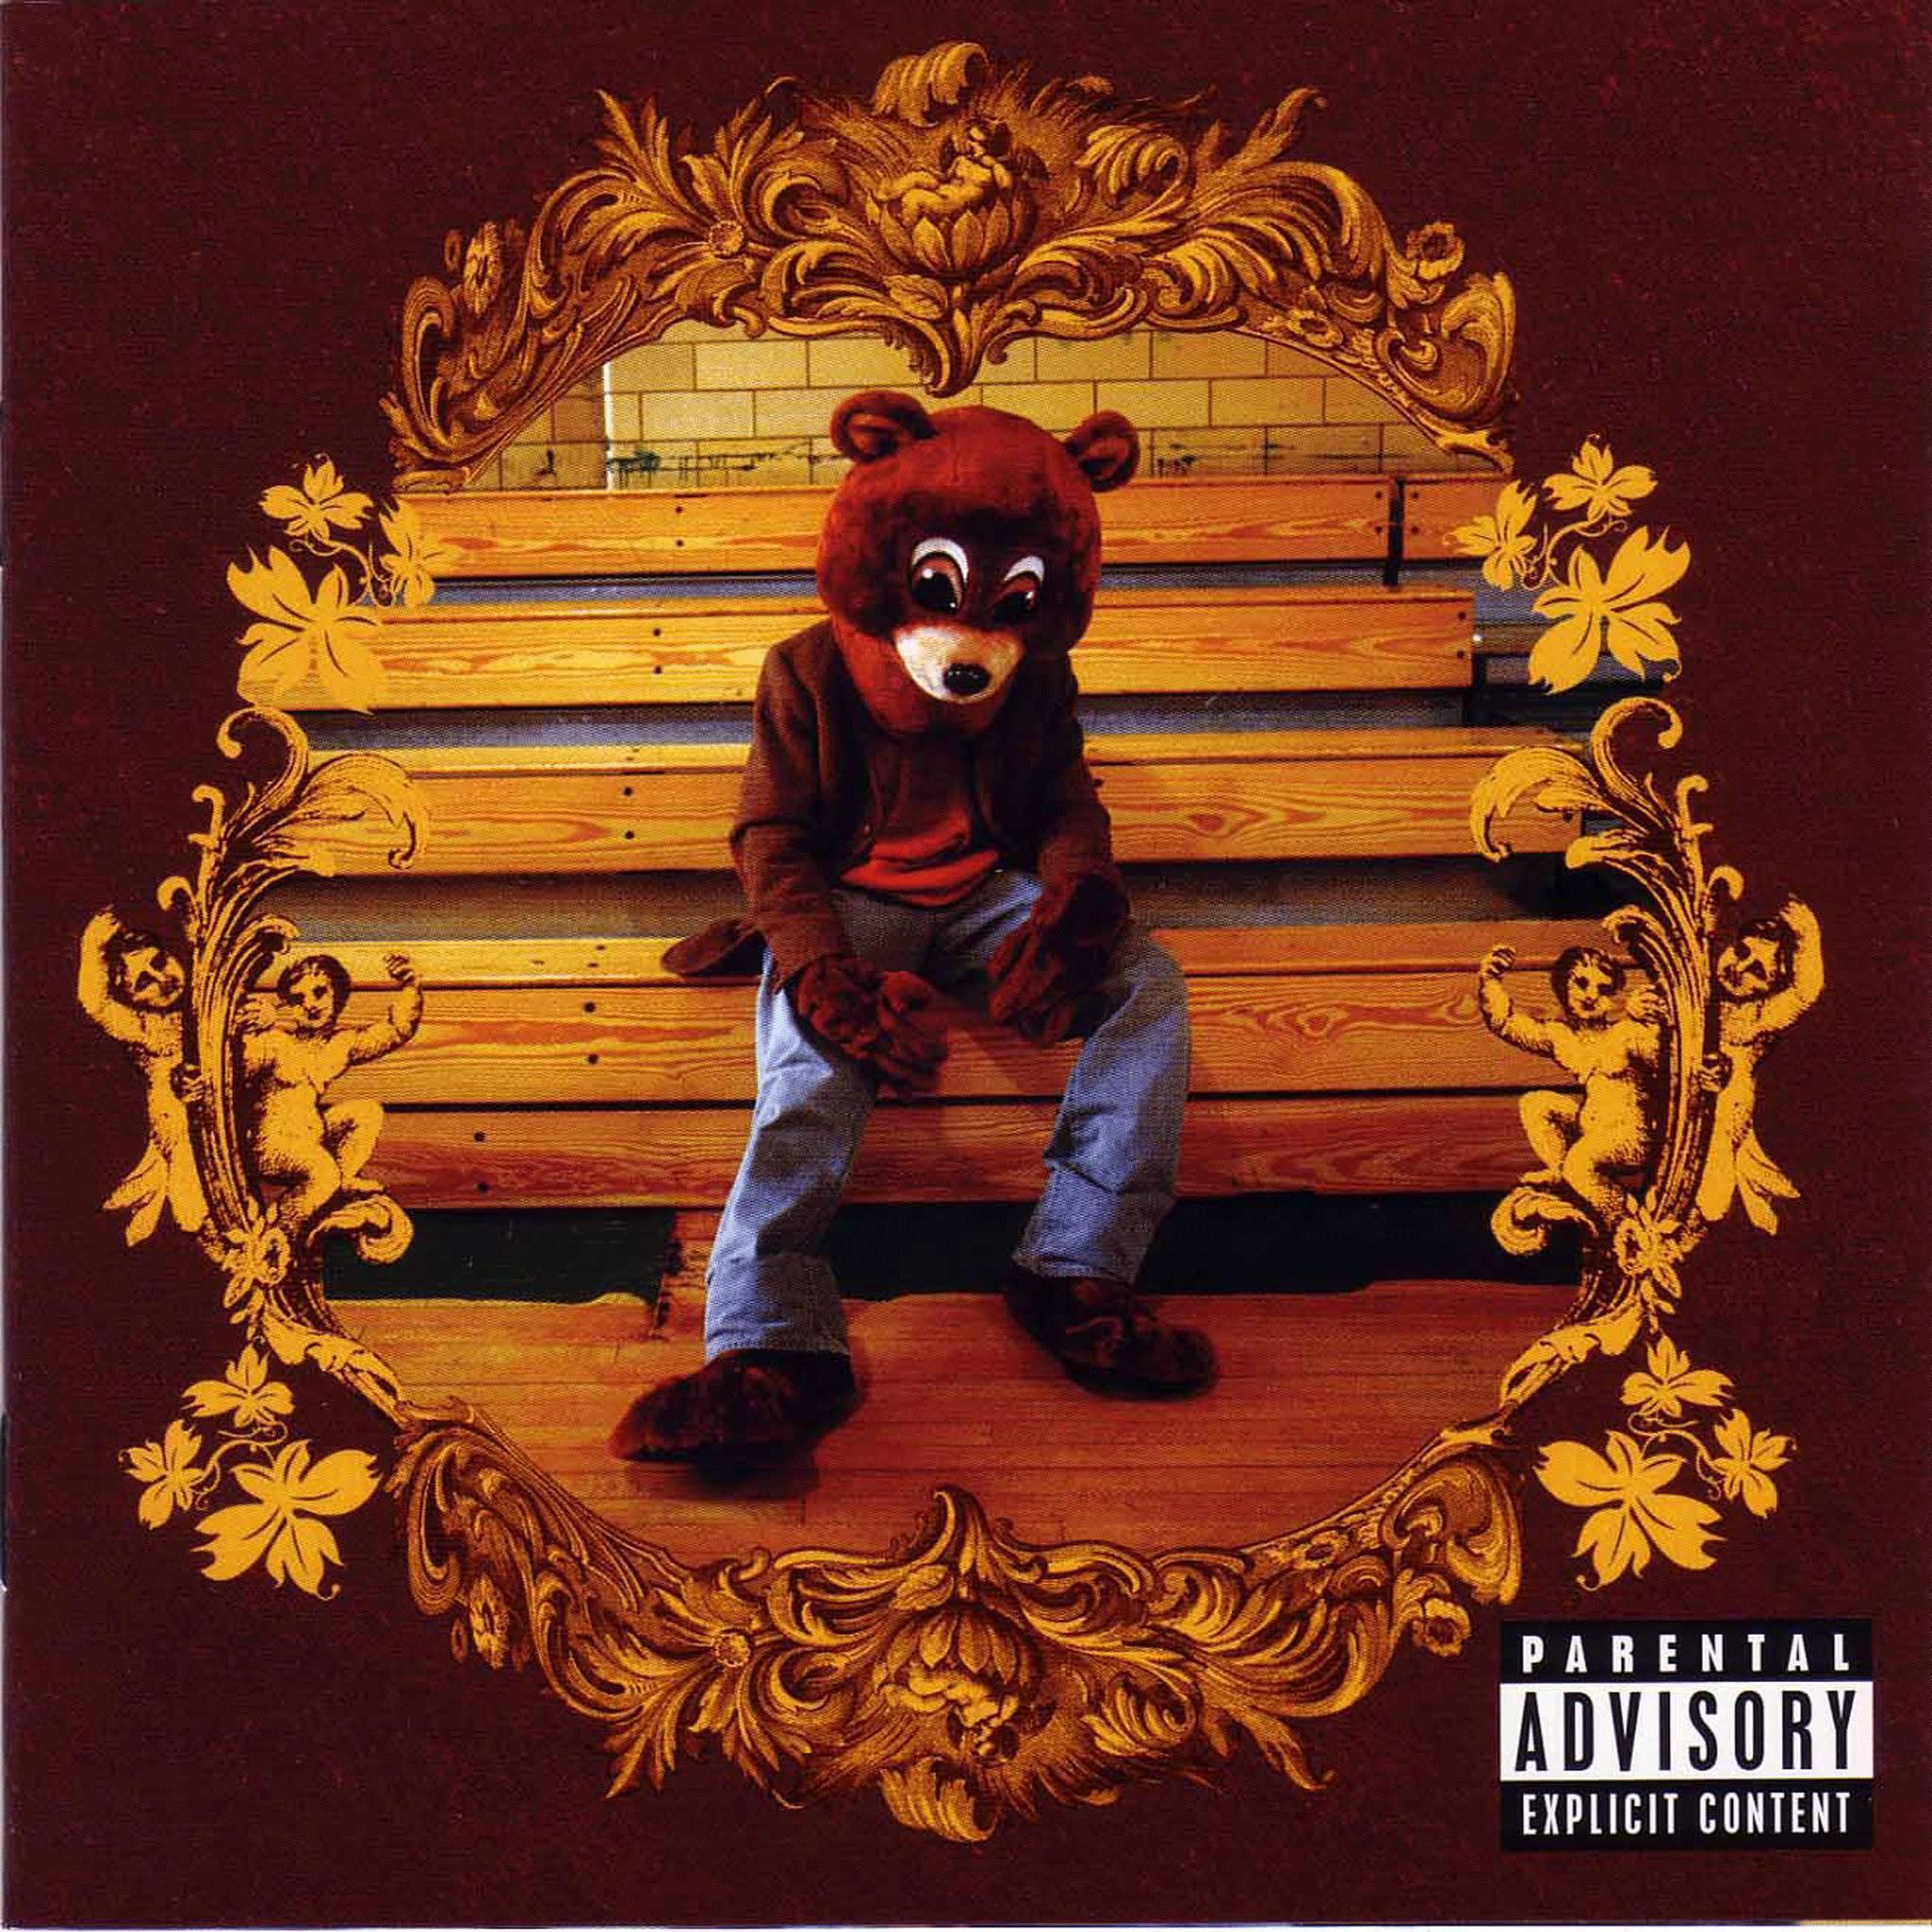 Kanye West's The College Dropout went 2 x platinum in the UK and US